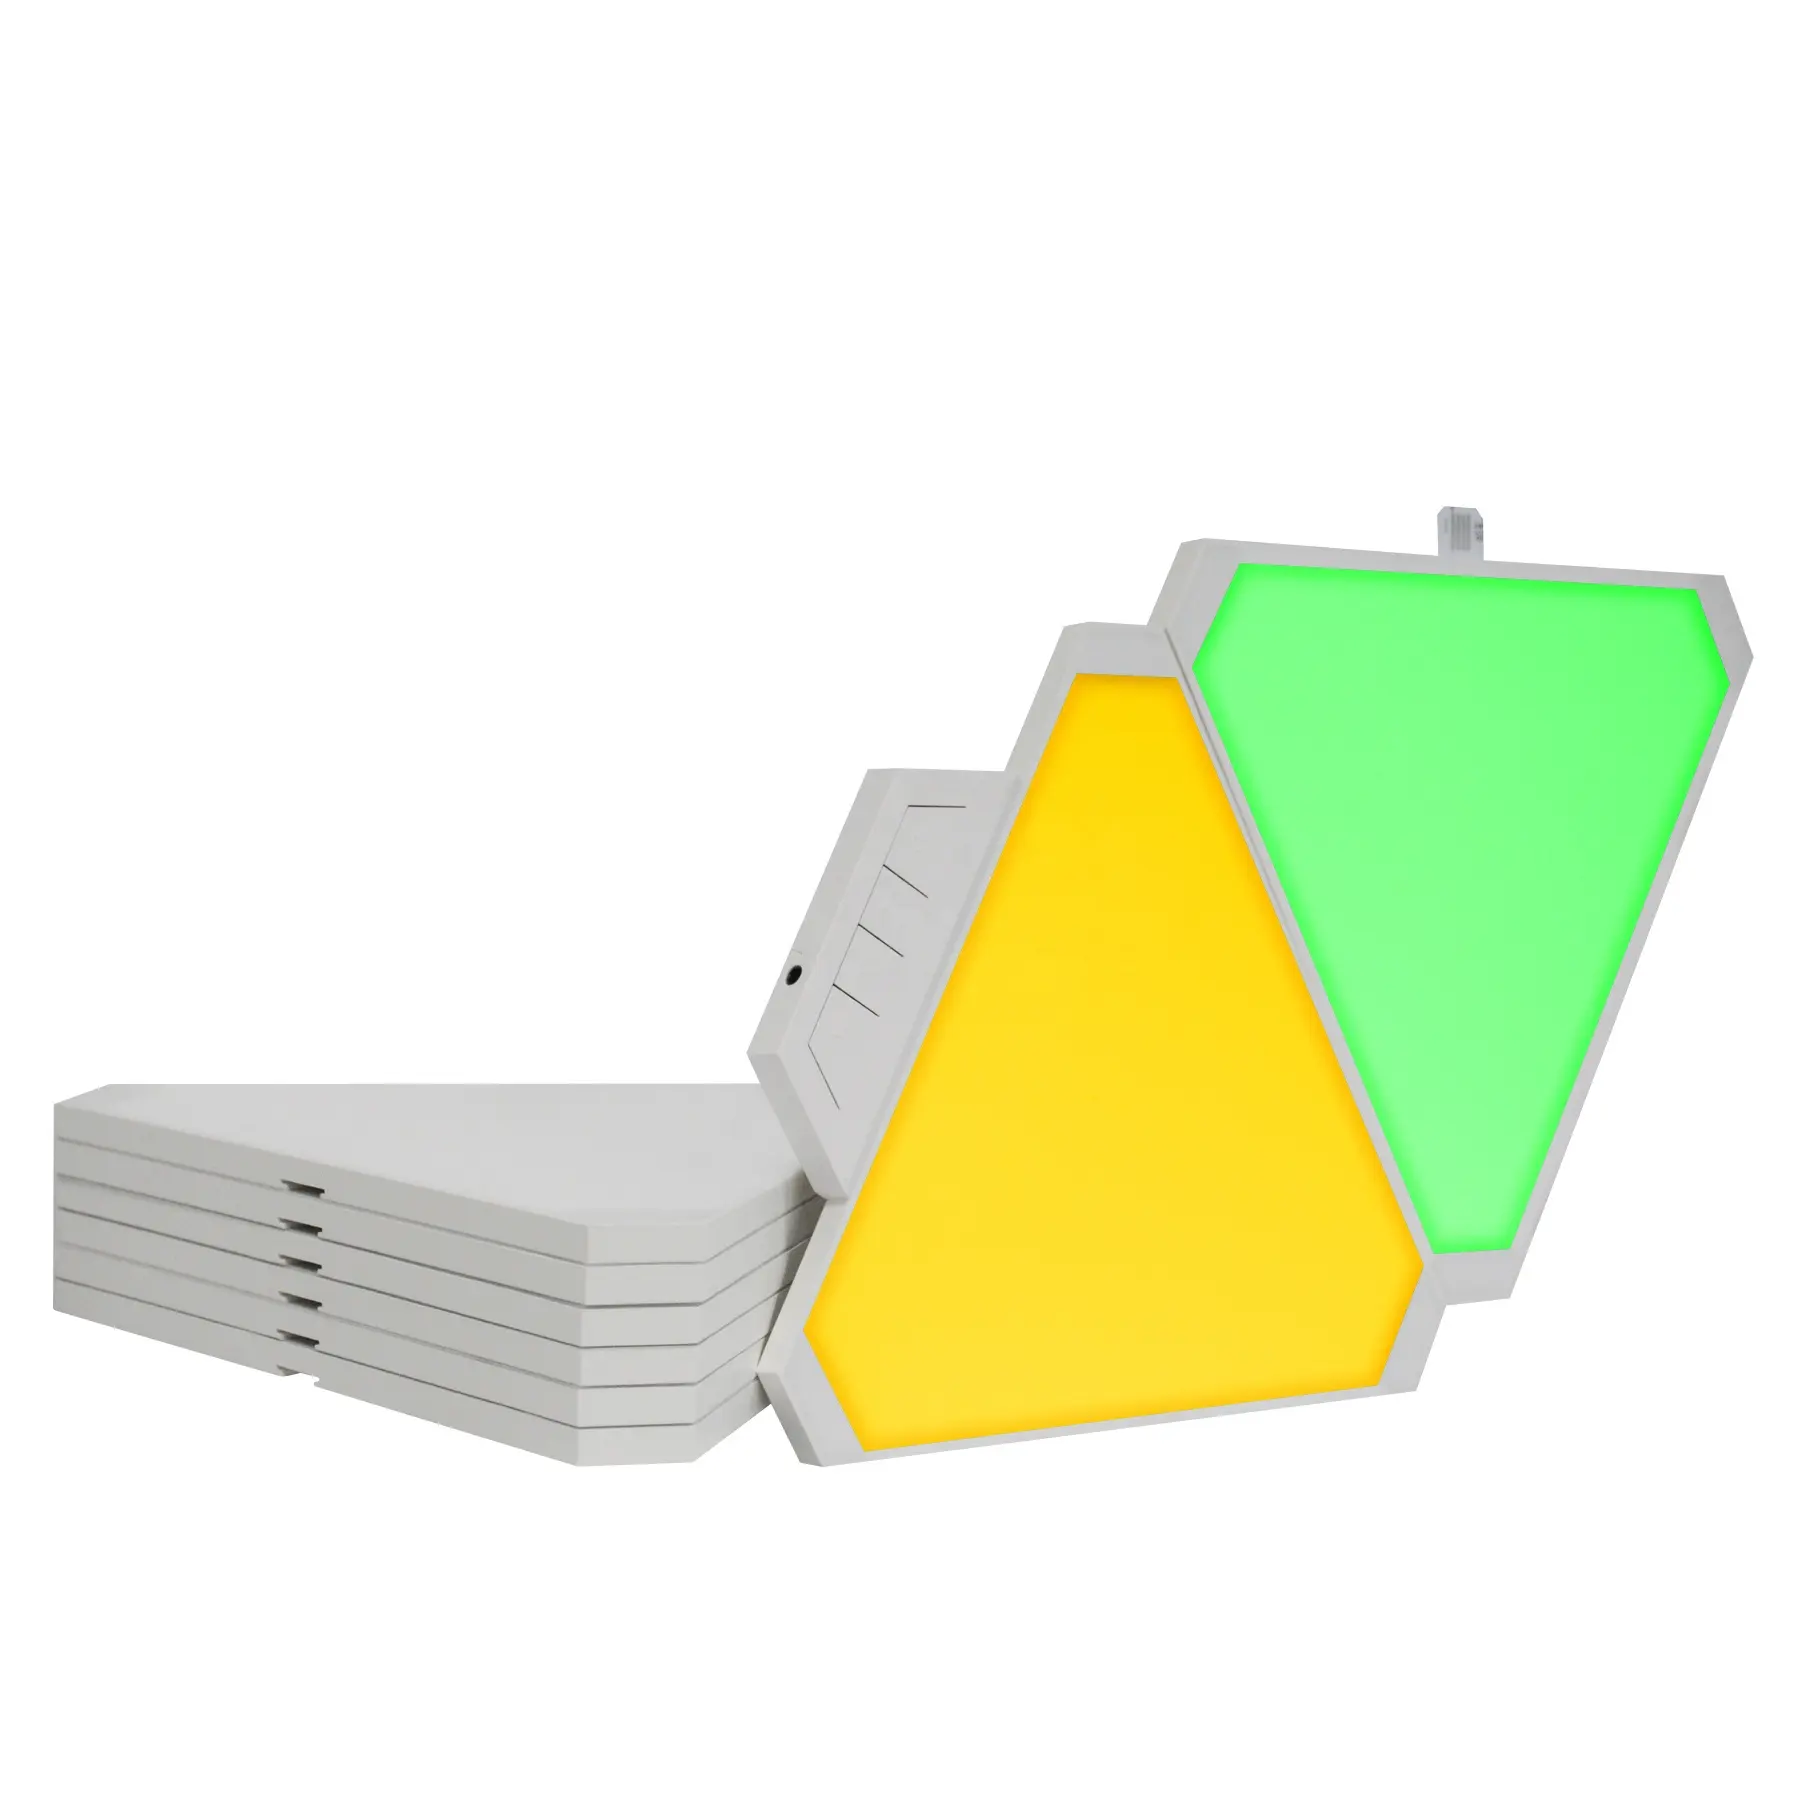 SK LIGHTING Smart Wifi Control Triangle RGBW Colorful Ceiling LED Panel Lights